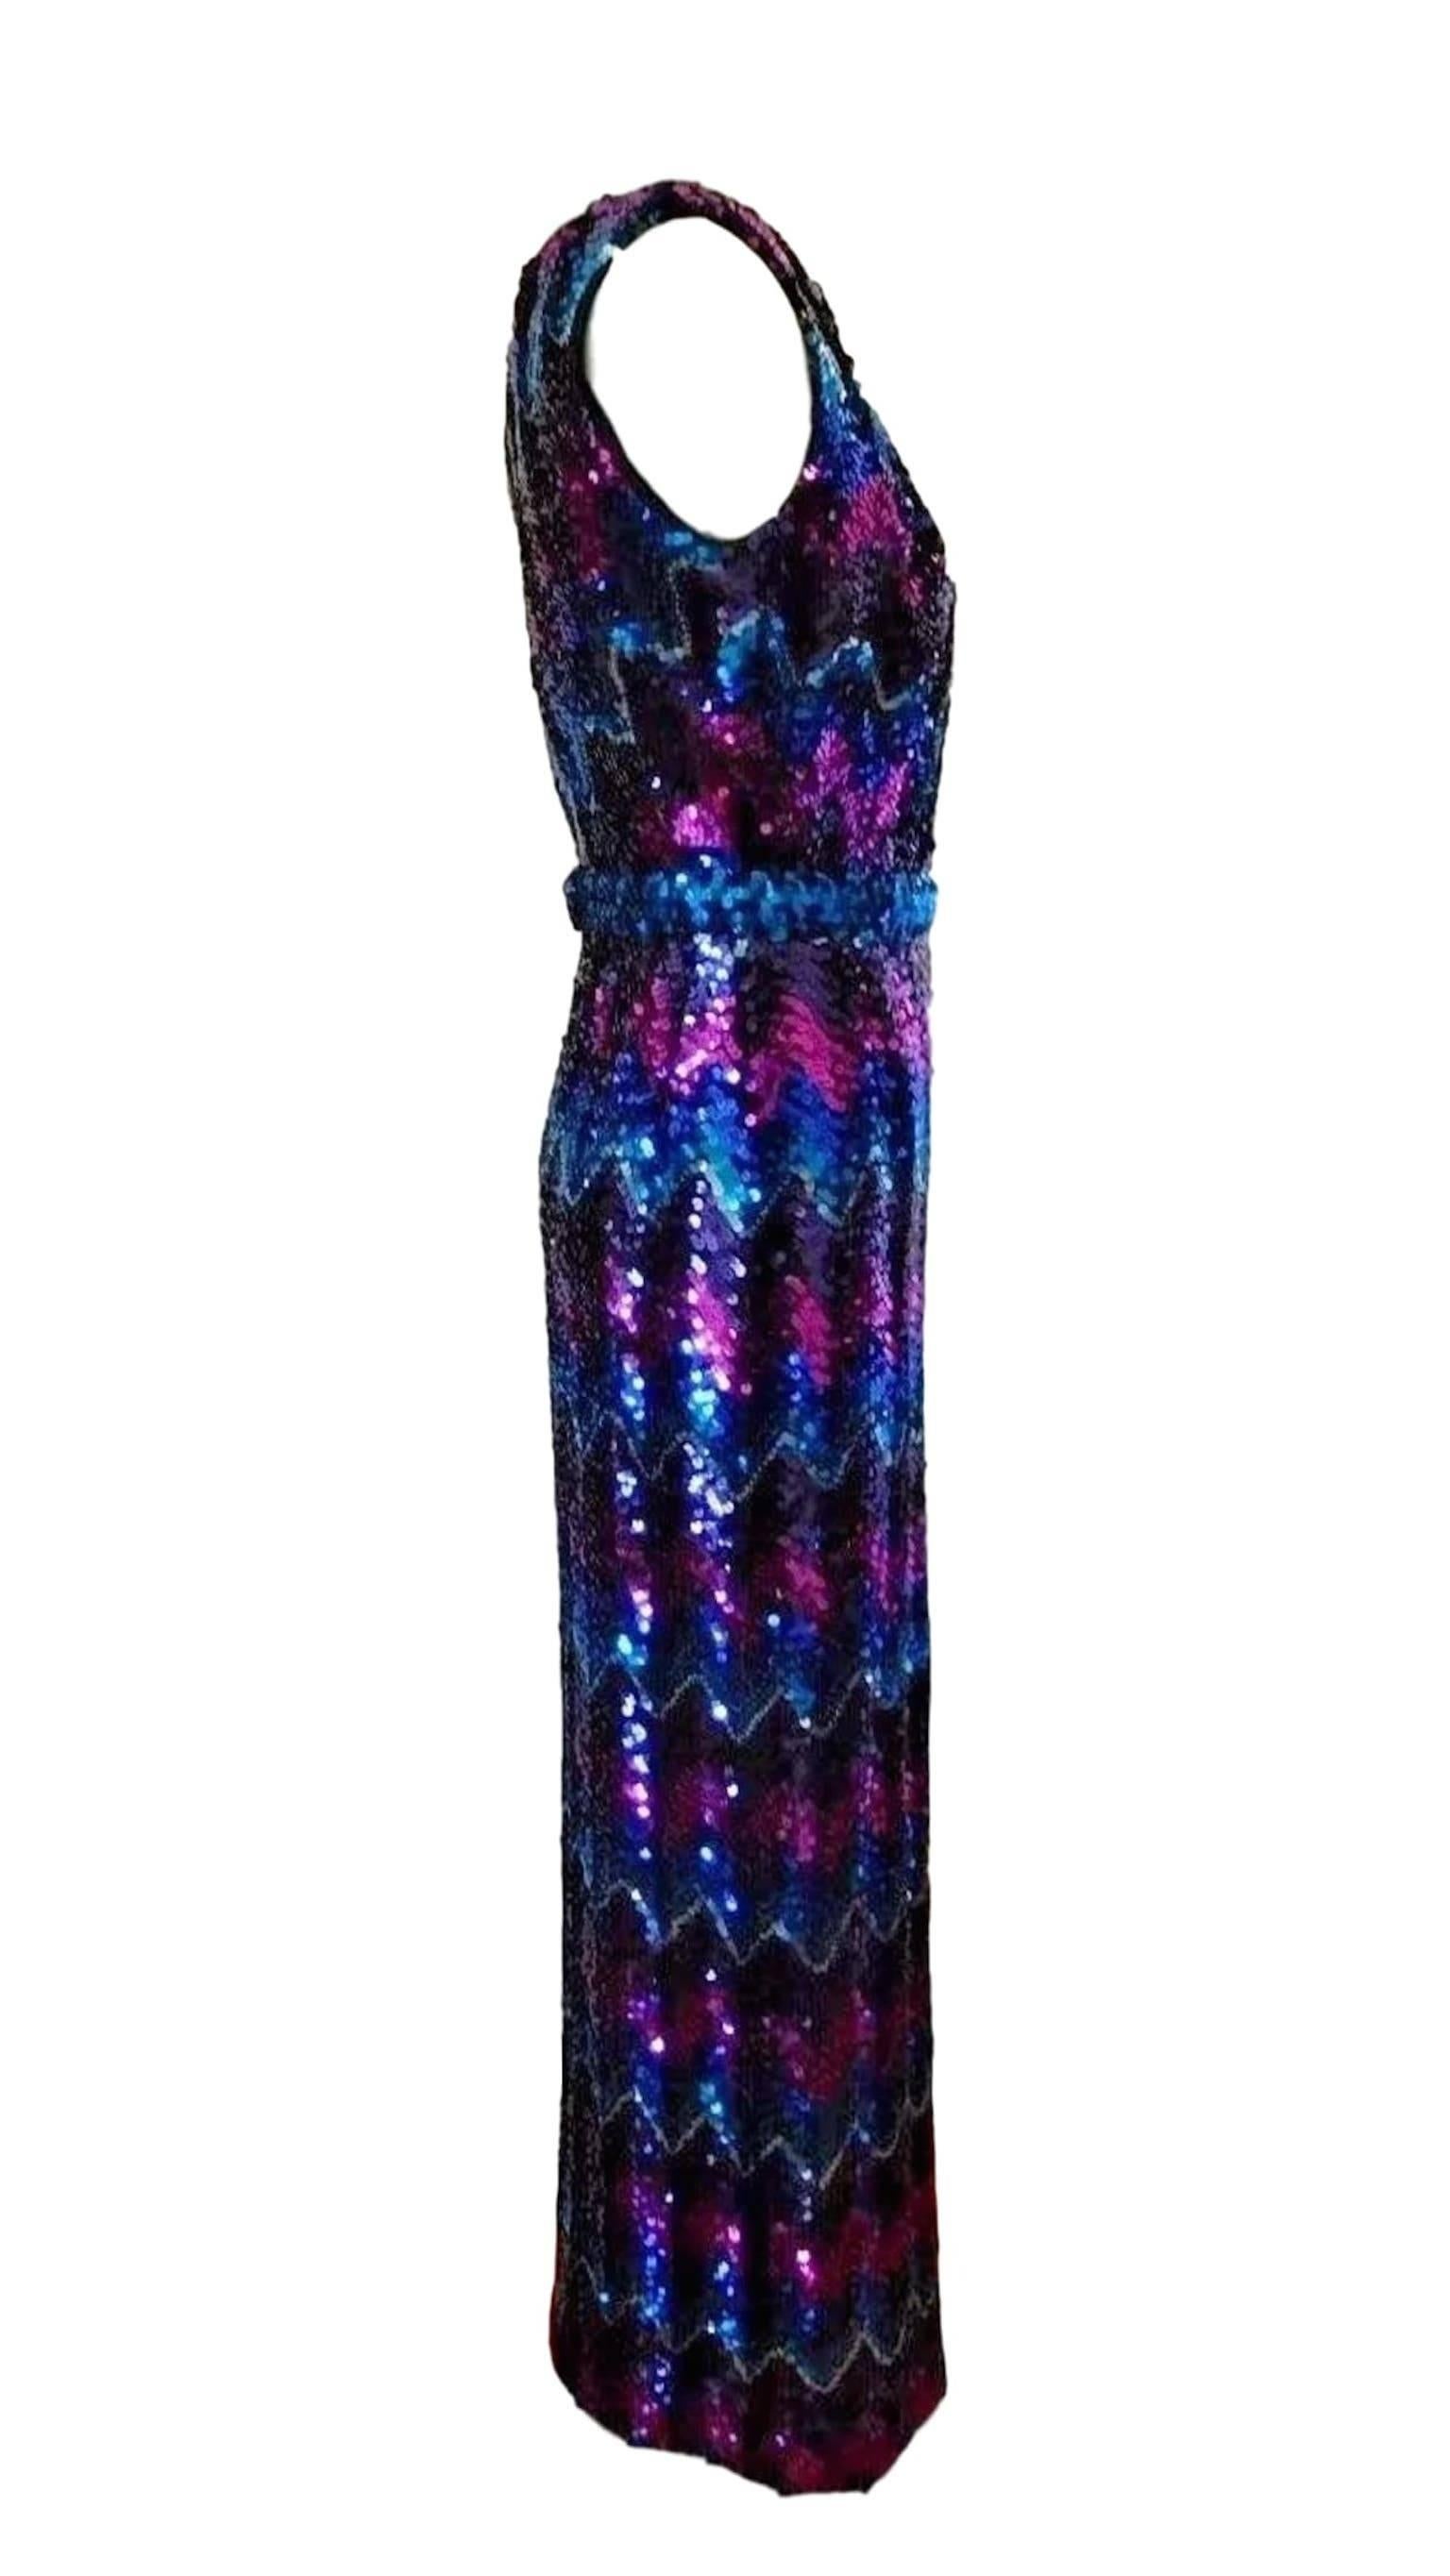 An unlabelled 1970s disco eras one shoulder maxi dress, fabulous piece! with chevron sequins in purples and blues. Strong sturdy piece and in excellent condition.
Measures bust waist and length
